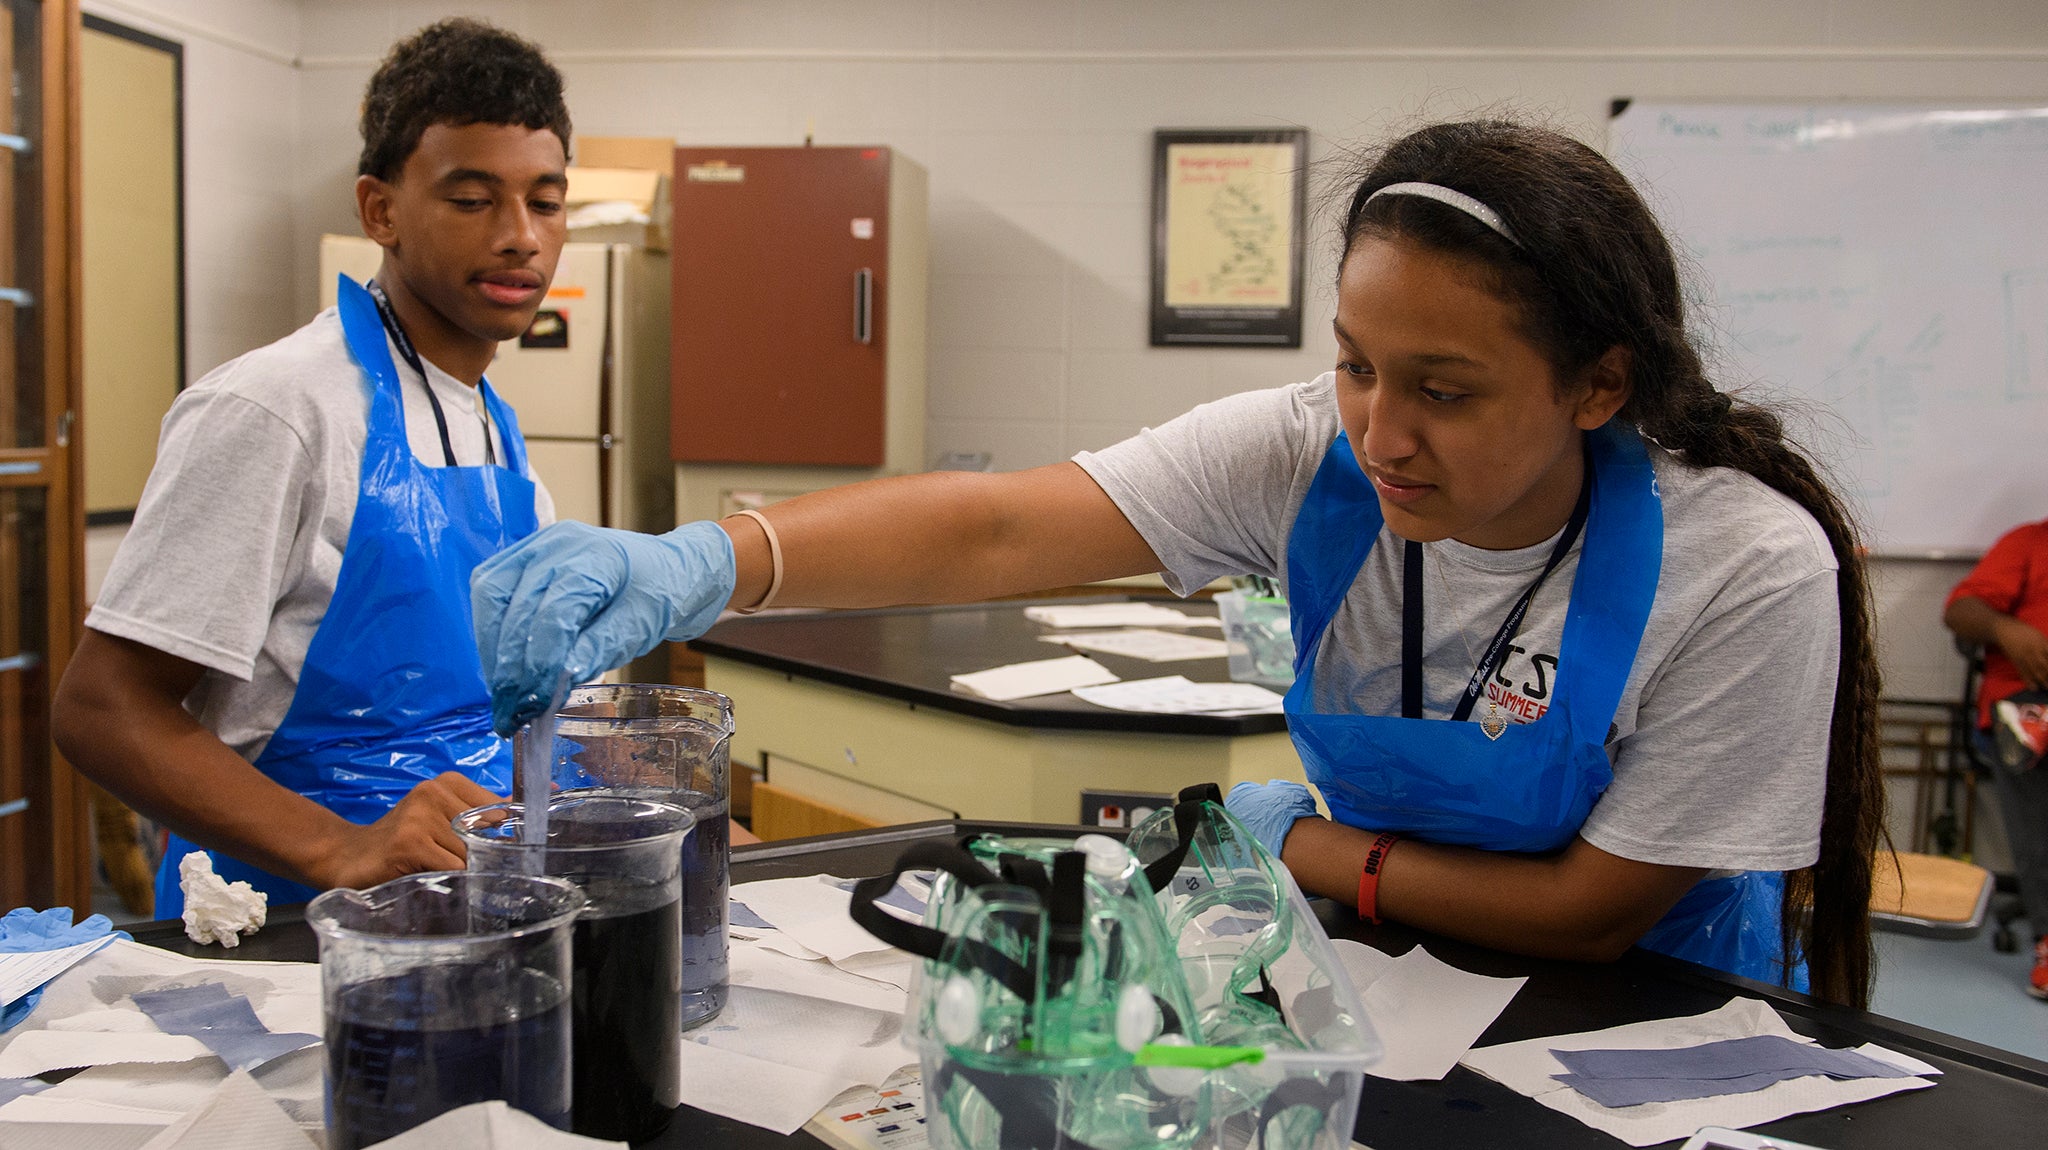 CSI summer camp gives students experiences in crime scene science The